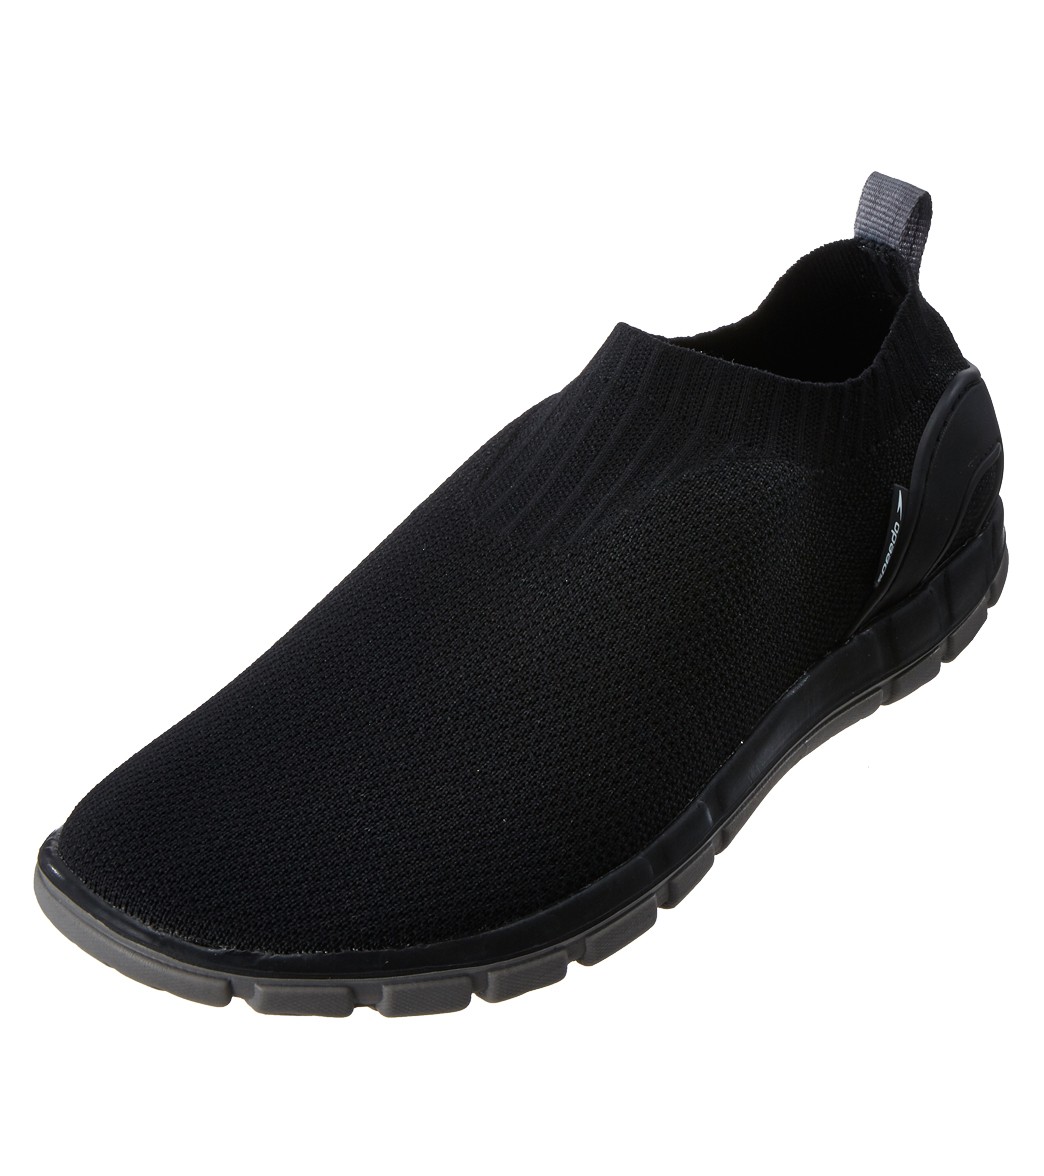 Speedo Men's Surf Knit Edge Water Shoe at SwimOutlet.com - Free Shipping